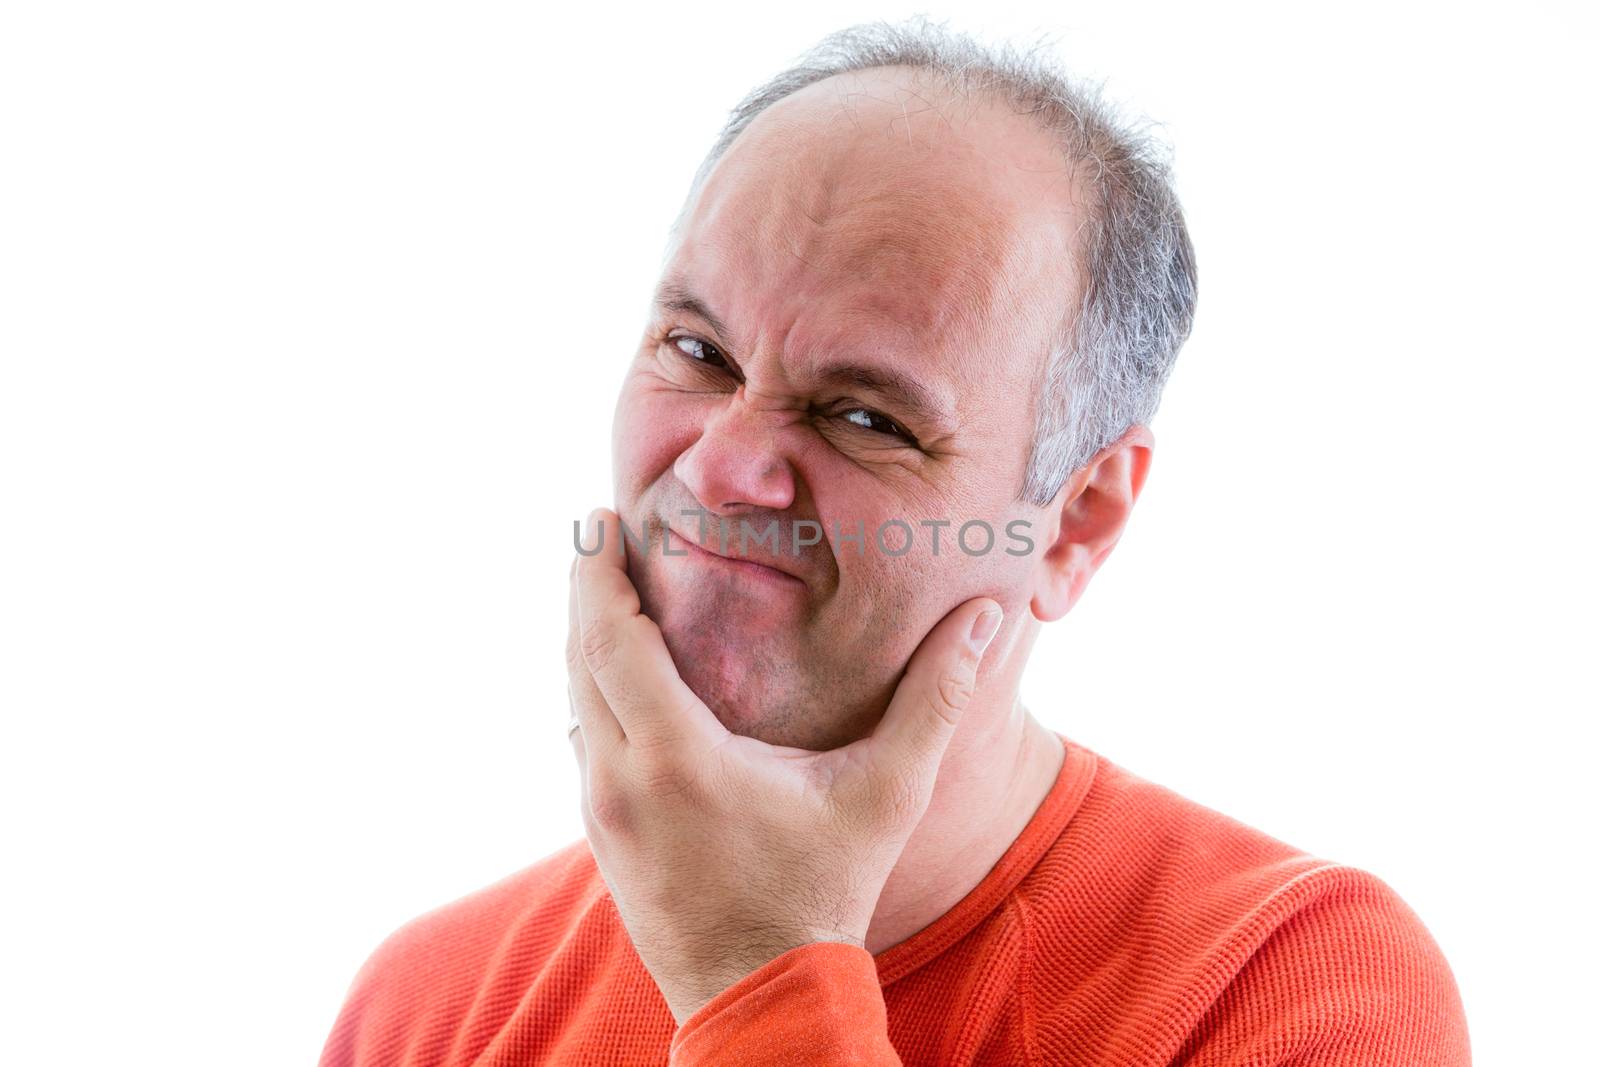 Man feeling ashamed and sorry for something he has done holding his hand to his chin and grimacing as he looks at the camera, head and shoulders on white